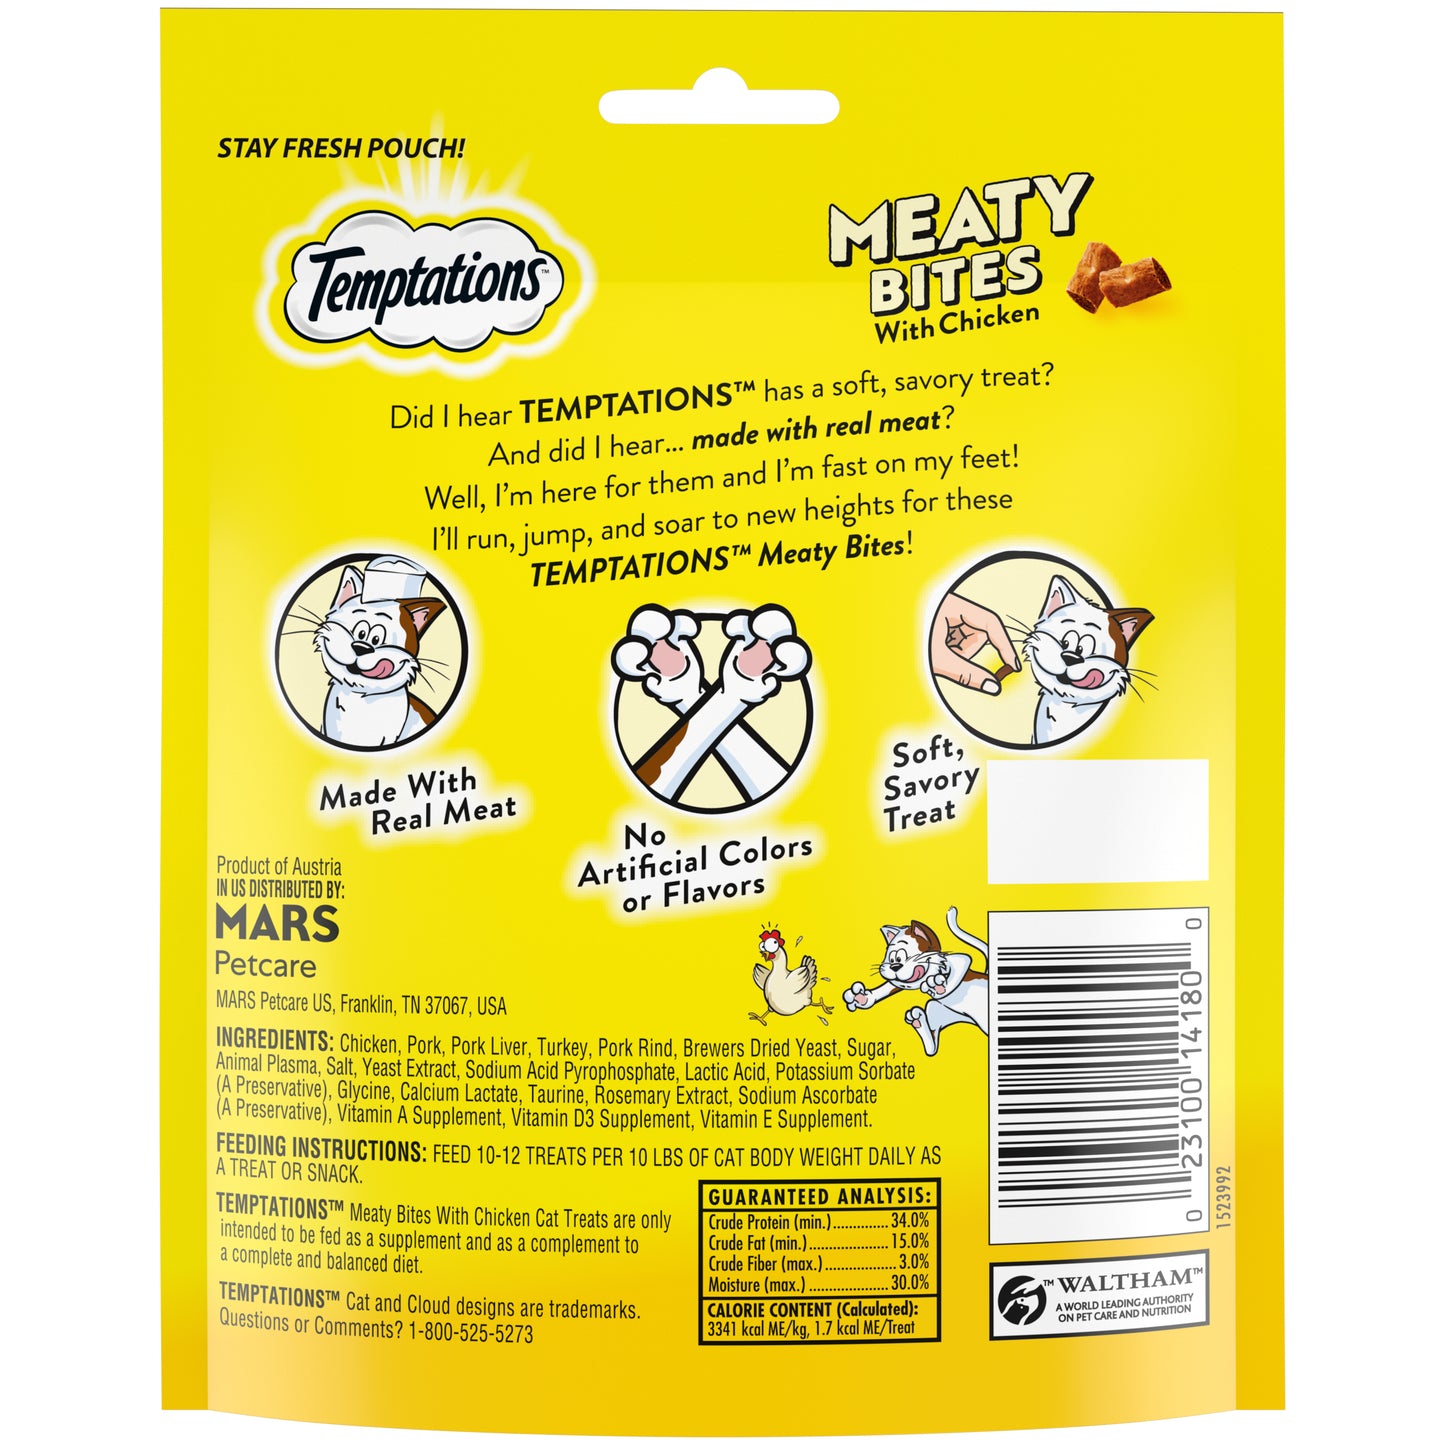 [Temptations][TEMPTATIONS Meaty Bites, Soft and Savory Cat Treats, Chicken Flavor, 4.1 oz. Pouch][Back Image]